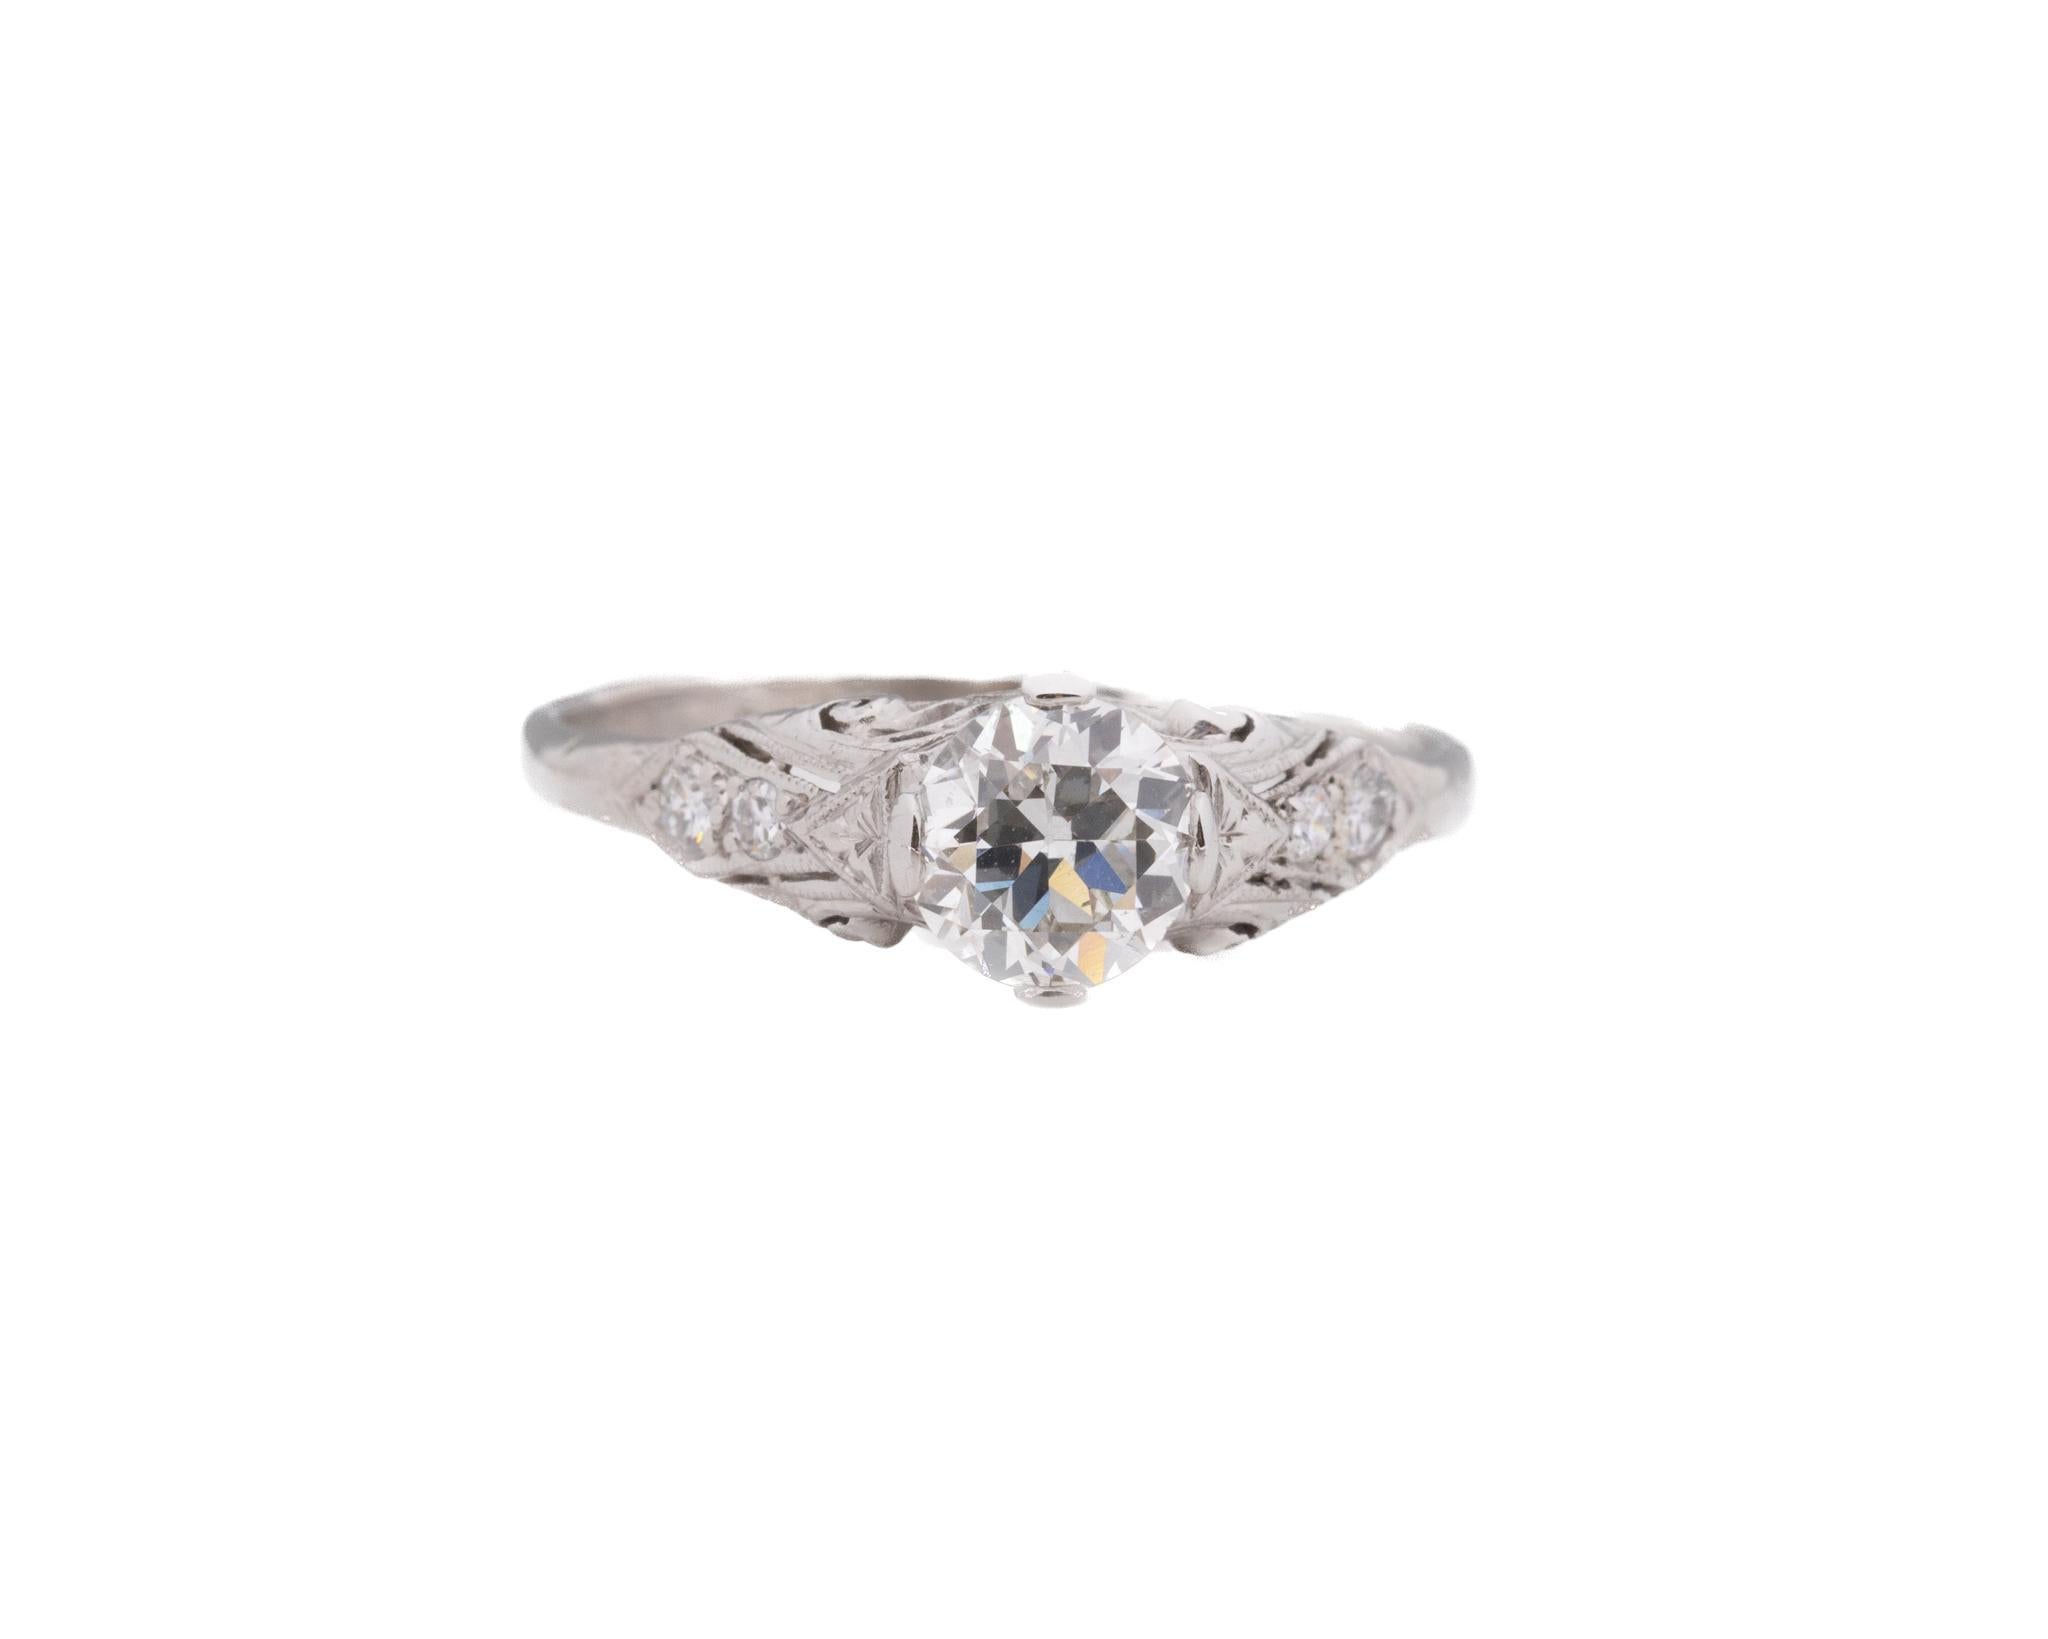 Year: 1920S
Item Details:
Ring Size: 9 (Sizable)
Metal Type: Platinum [Hallmarked, and Tested]
Weight: 3.7 grams
Center Diamond Details:
GIA Report#:7235080754
Weight: .94ct total weight
Cut: Old European brilliant
Color: I
Clarity: SI2
Type: